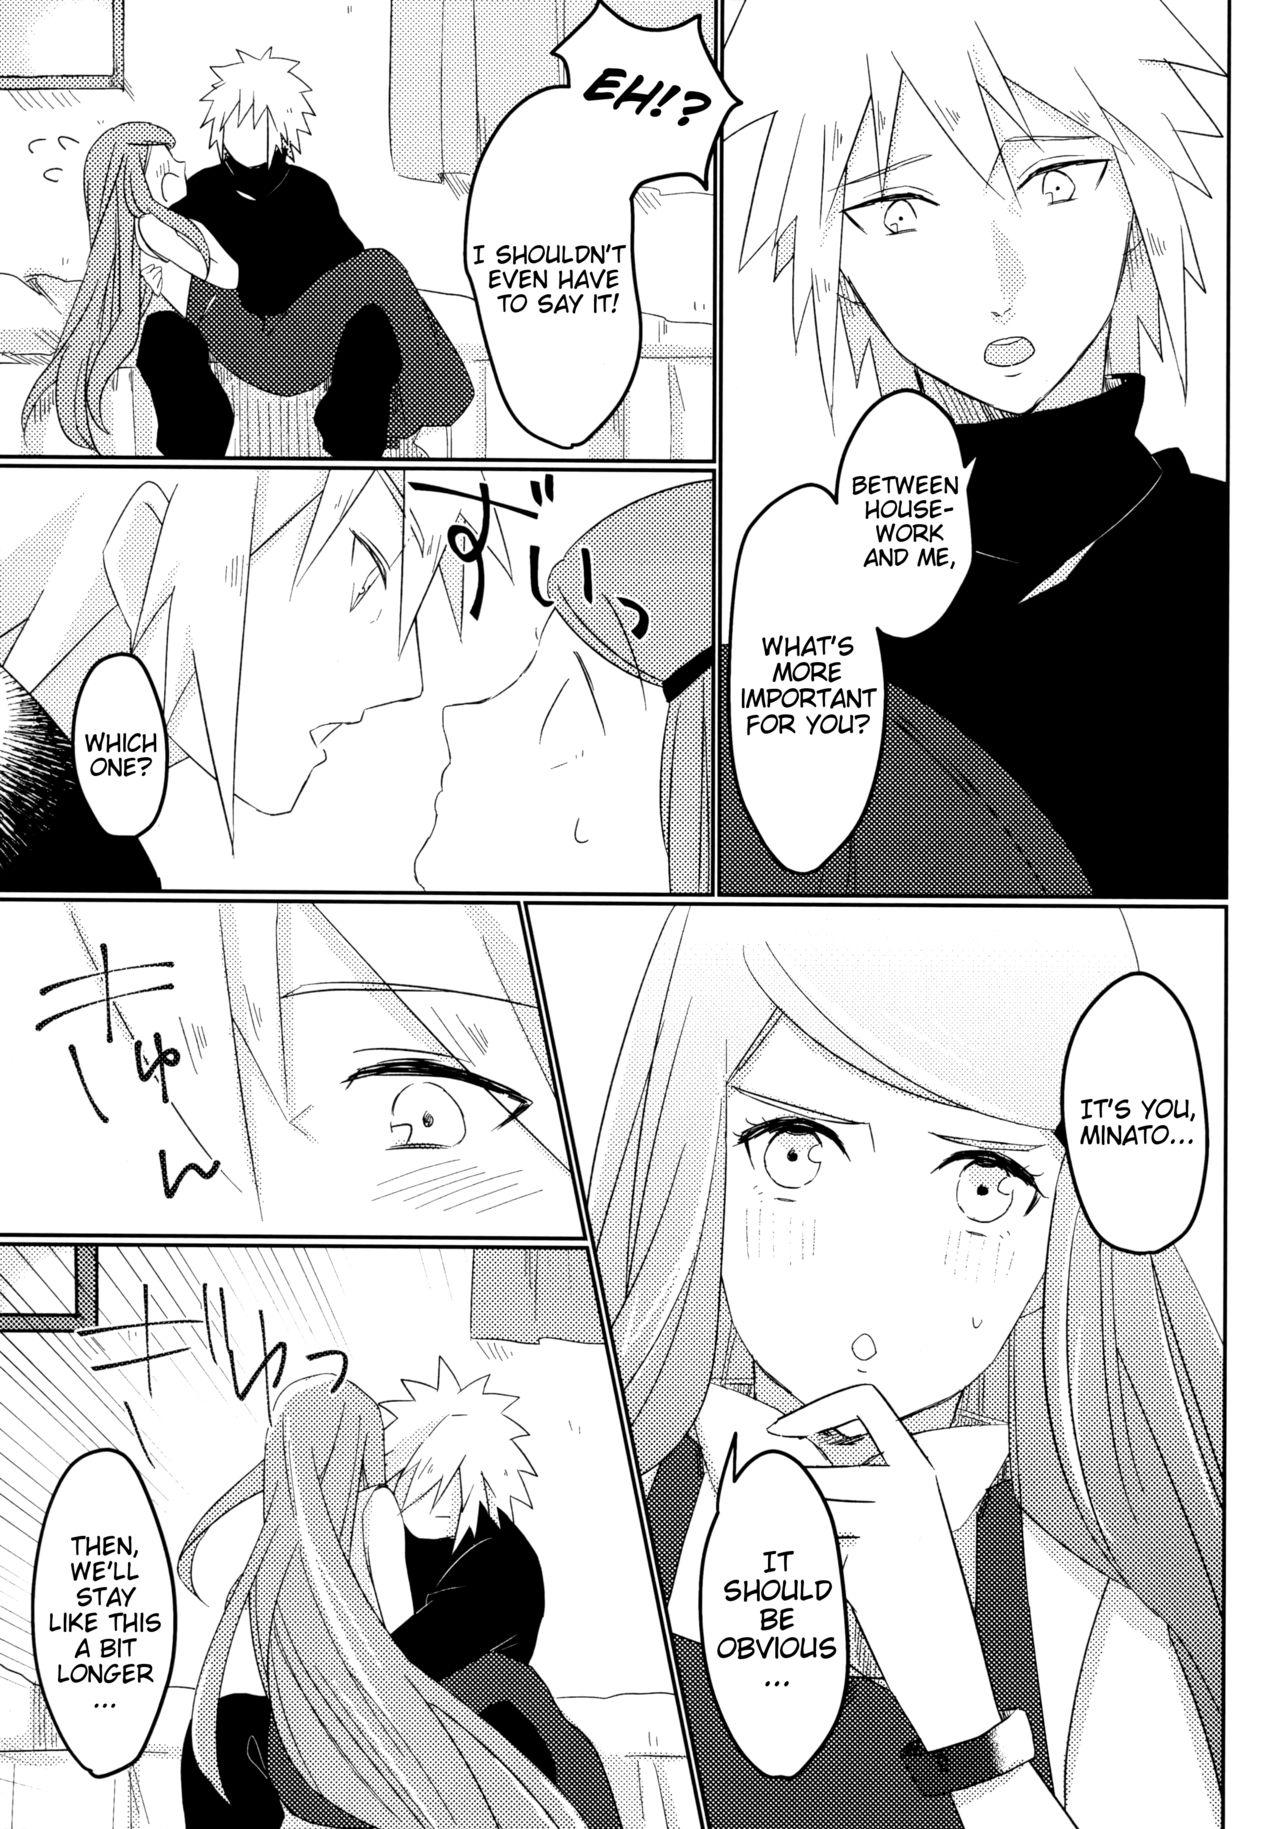 Red Only You Know - Naruto Cameltoe - Page 6